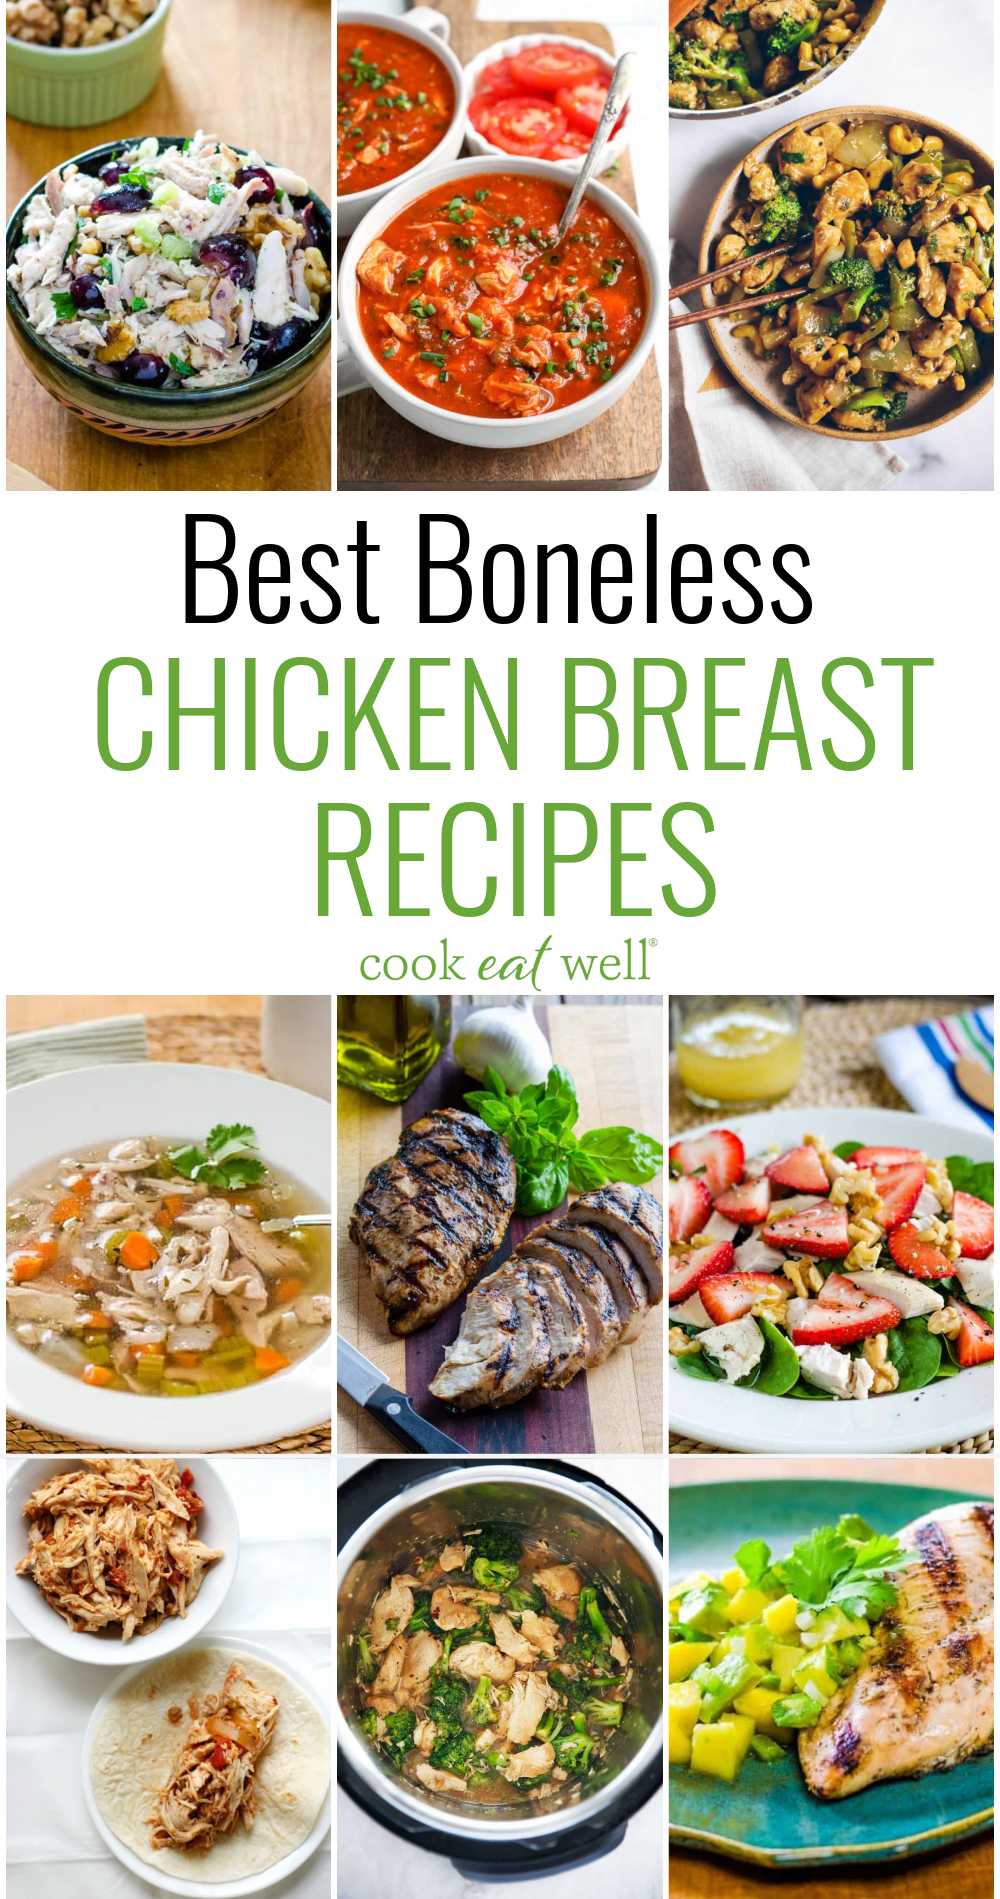 21 Boneless Chicken Breast Recipes For Easy Healthy Meals Cook Eat Well 